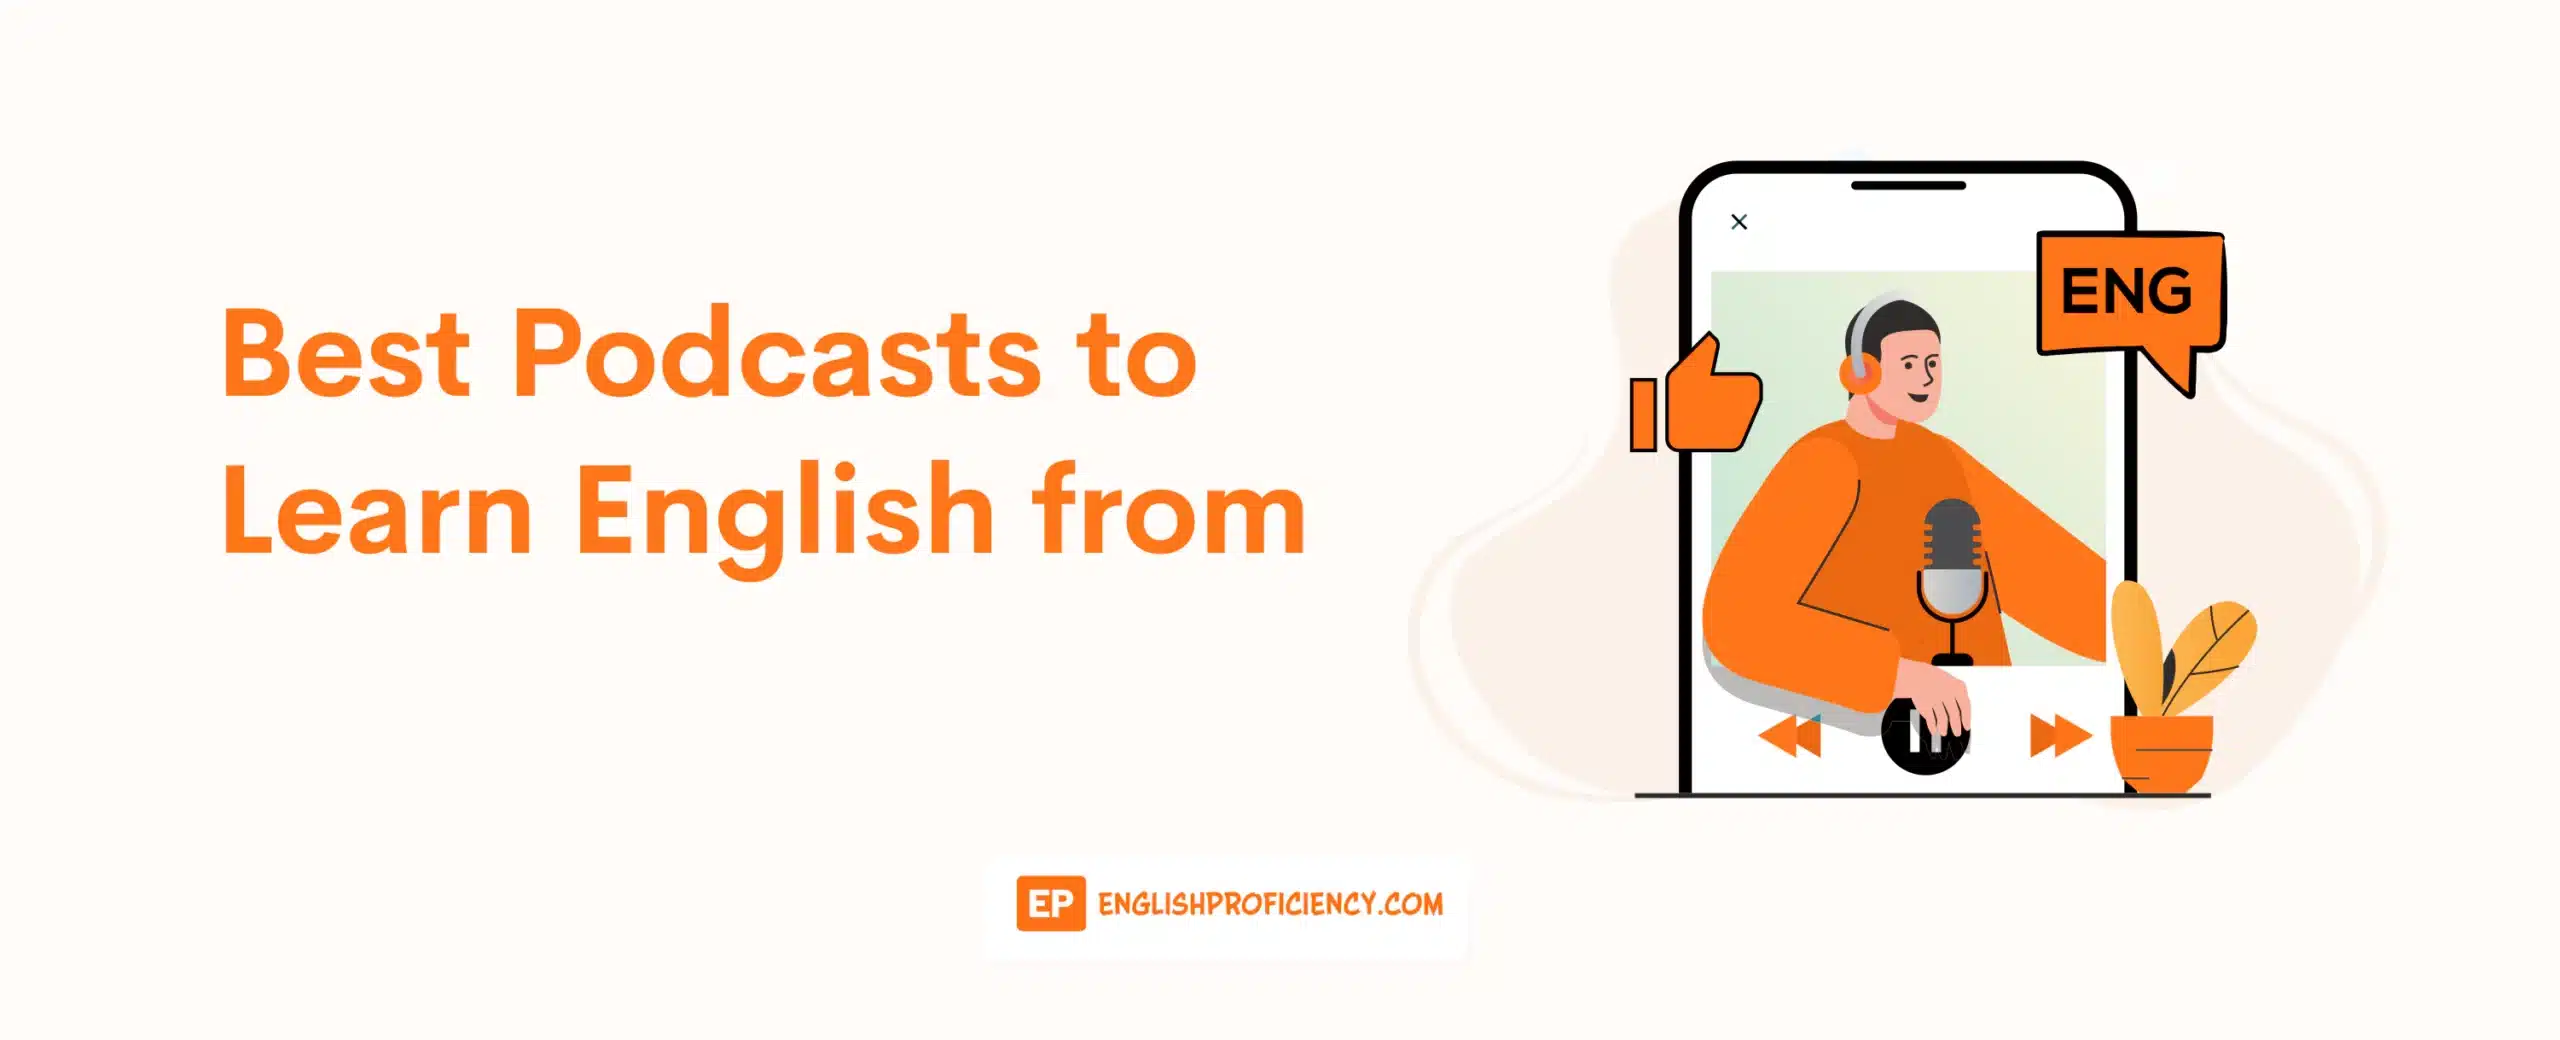 Best Podcasts to Learn English